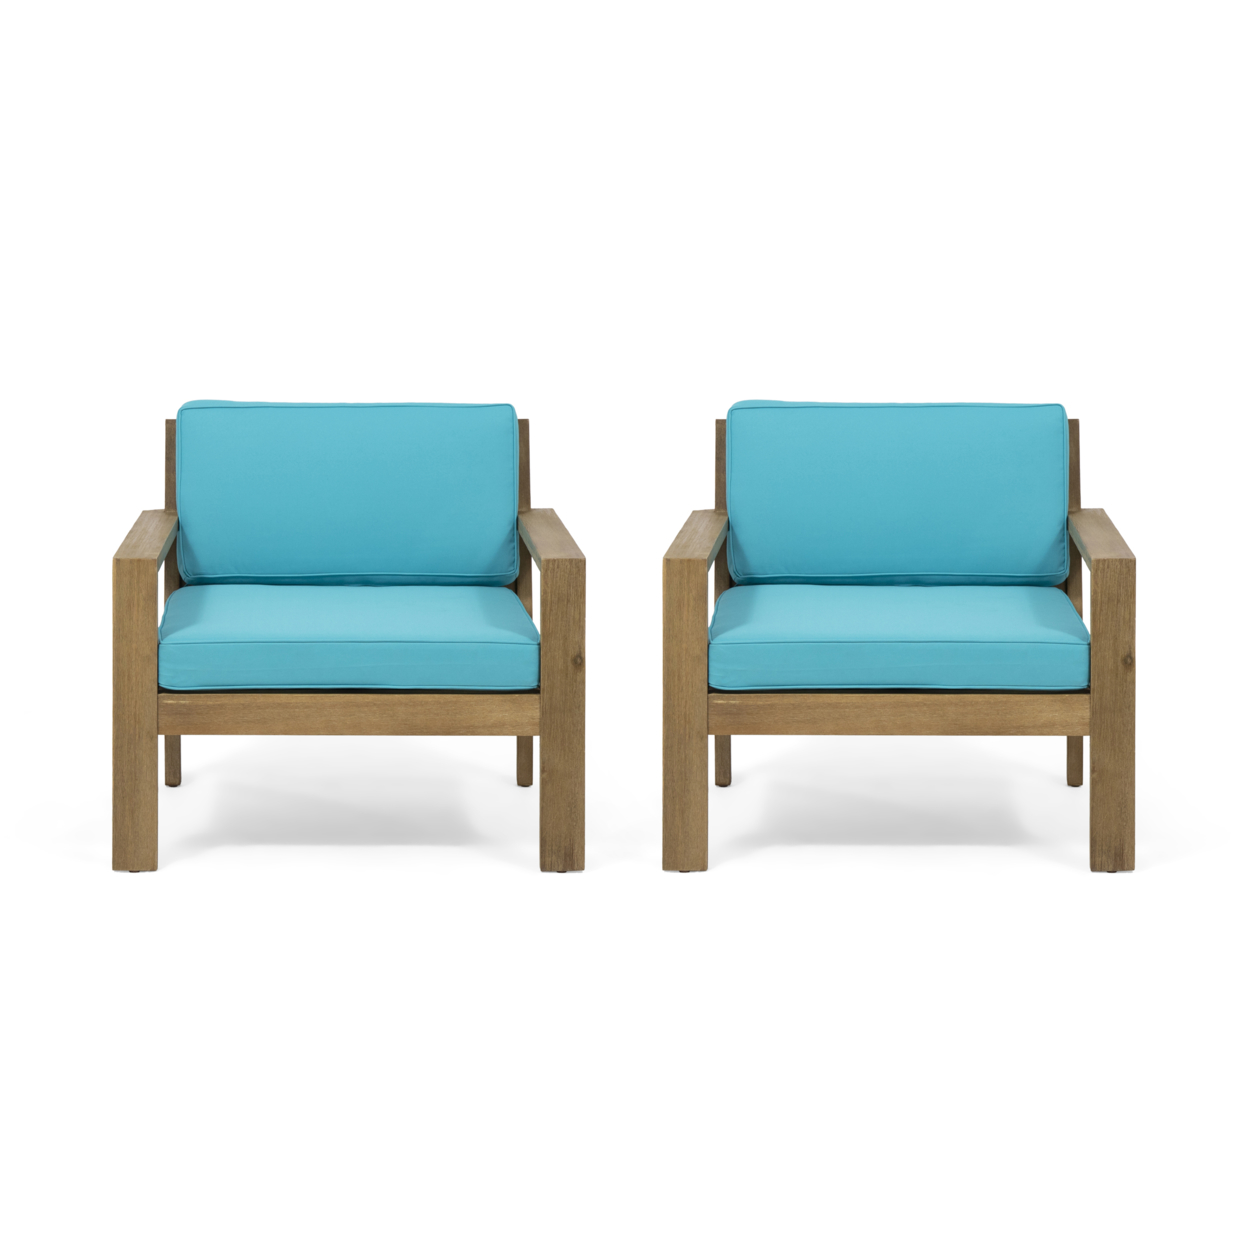 Miranda Outdoor Acacia Wood Club Chairs With Cushions (Set Of 2) - Brushed Light Brown Finish, Teal